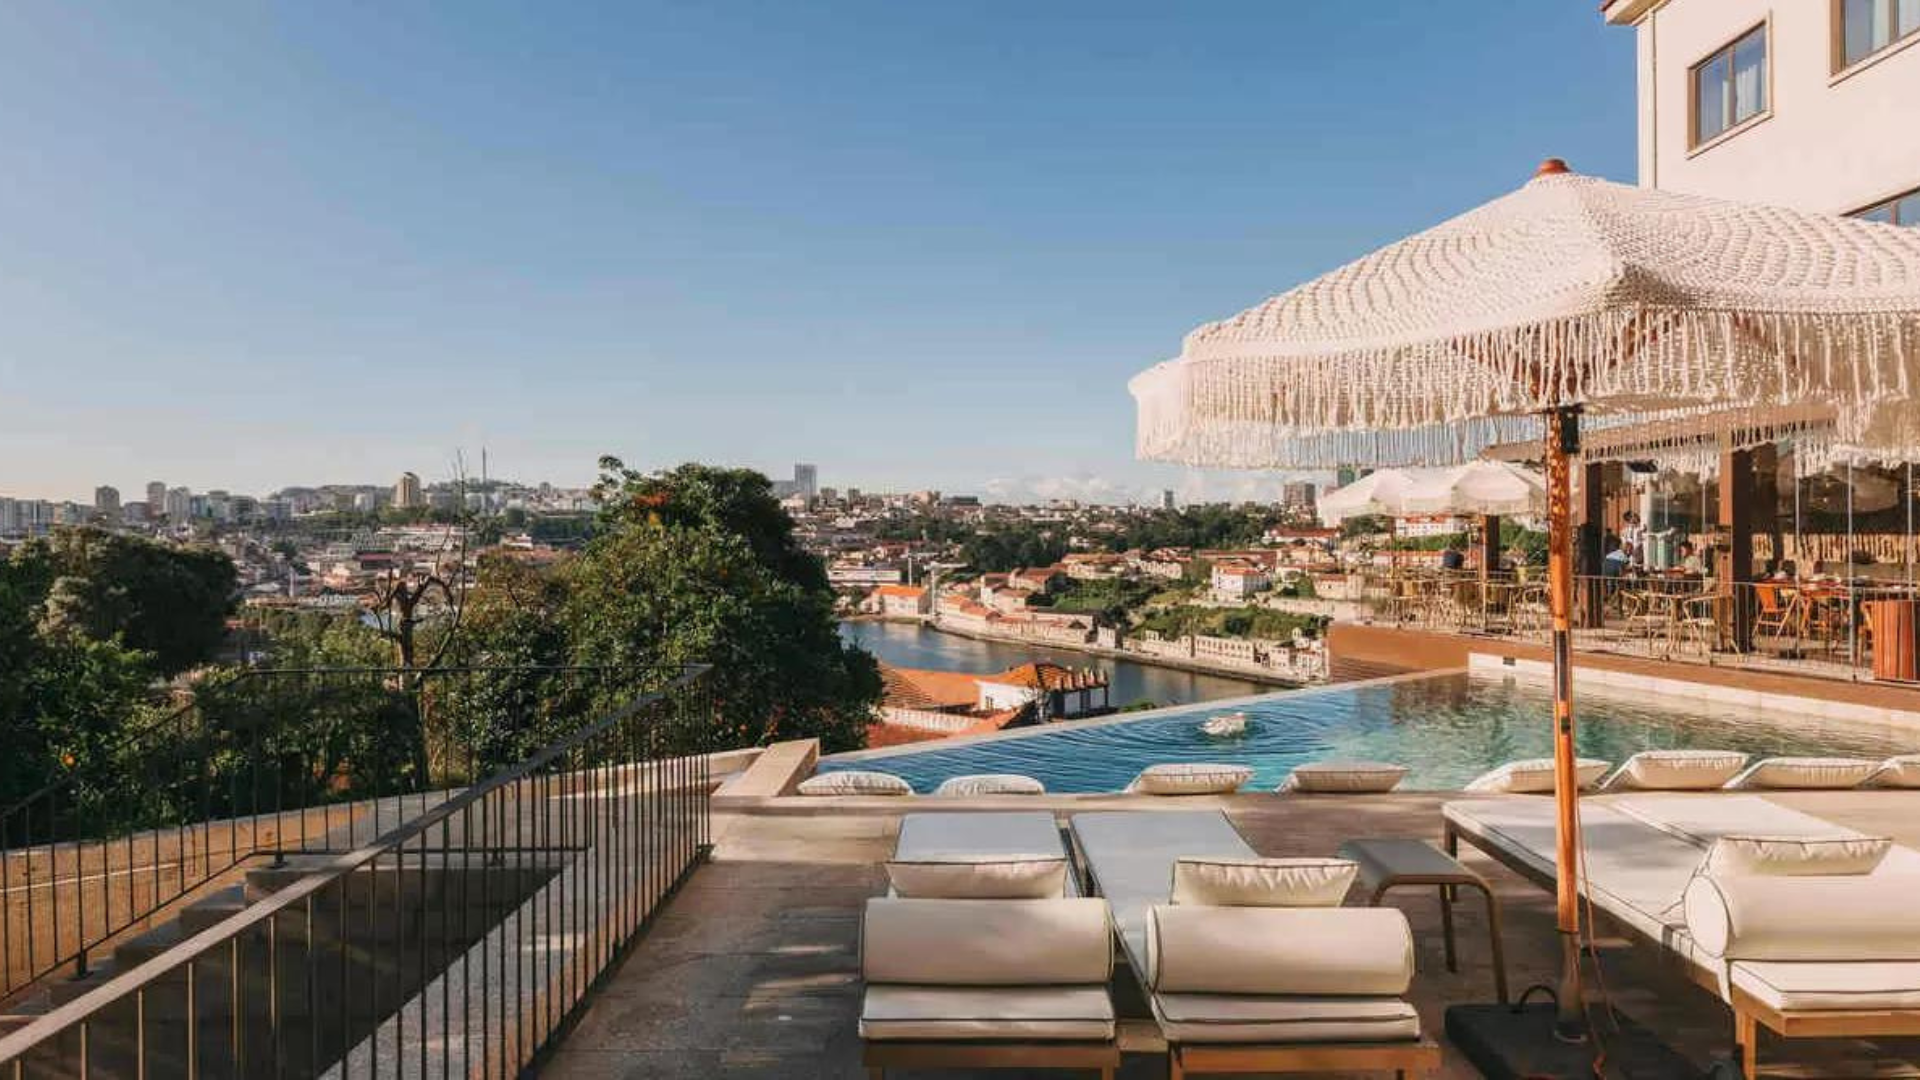 The best hotels in Portugal according to Condé Nast Traveller (21)